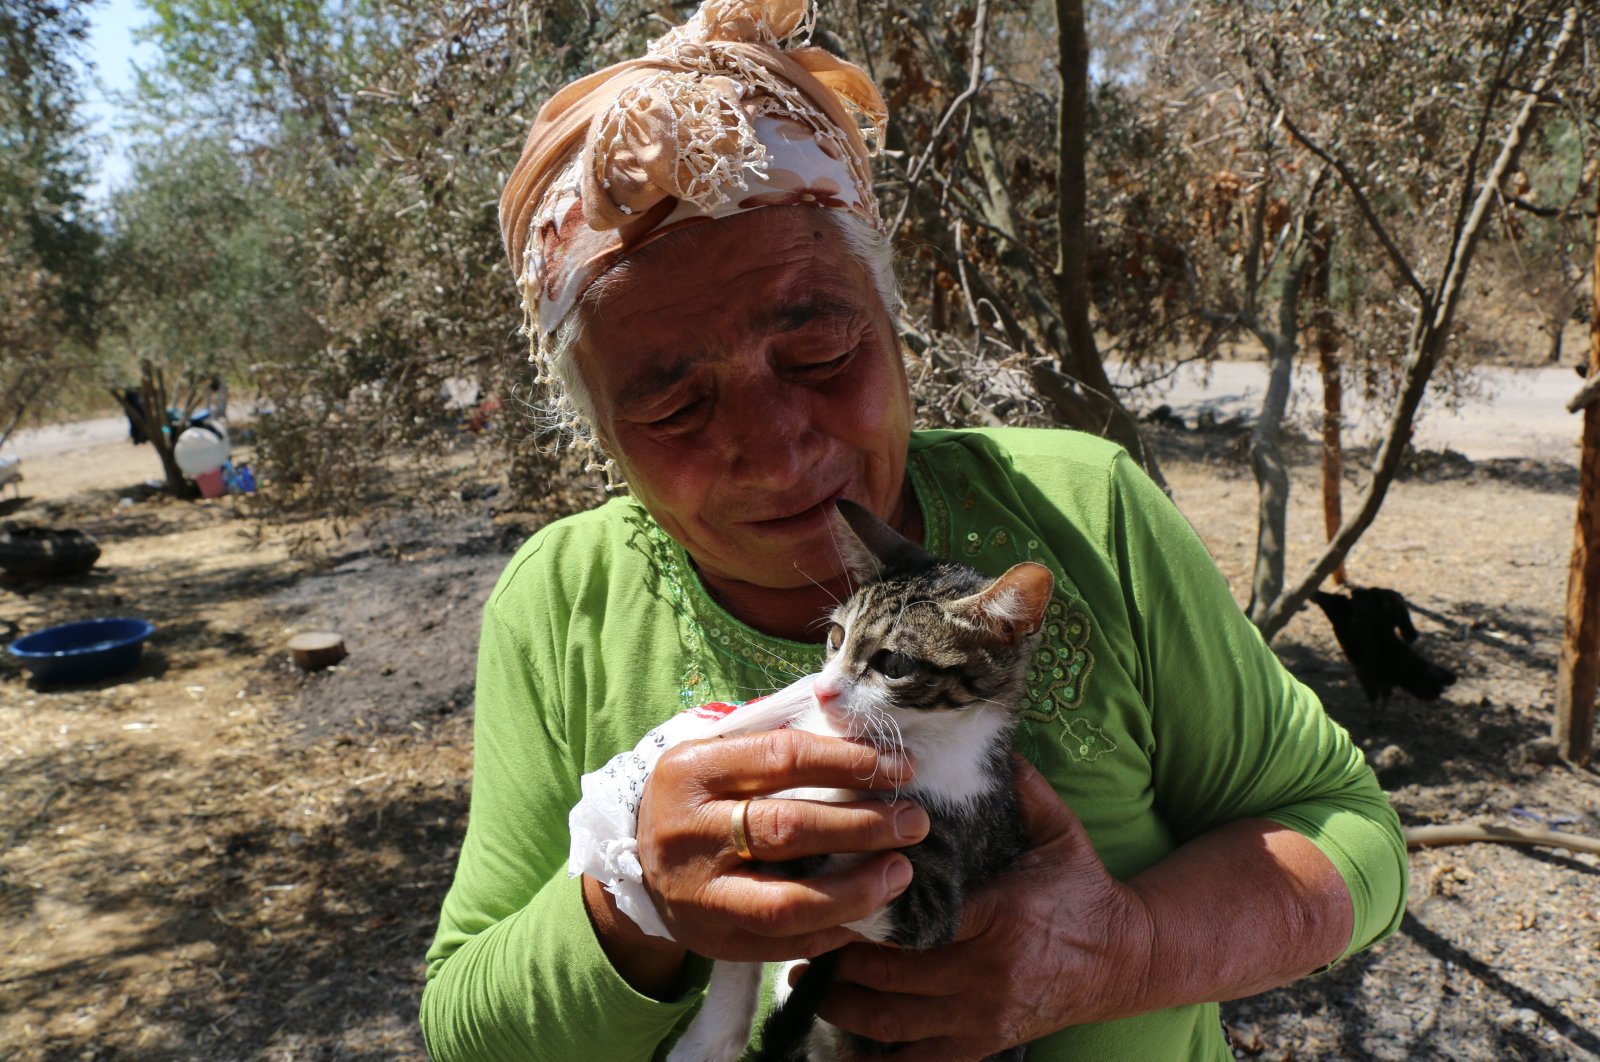 Fatma Duysak pets her cat "Hayat" who recovered after suffering injuries due to the wildfire, in Aladağ district, in Adana, southern Turkey, Aug. 6, 2021. (AA PHOTO)